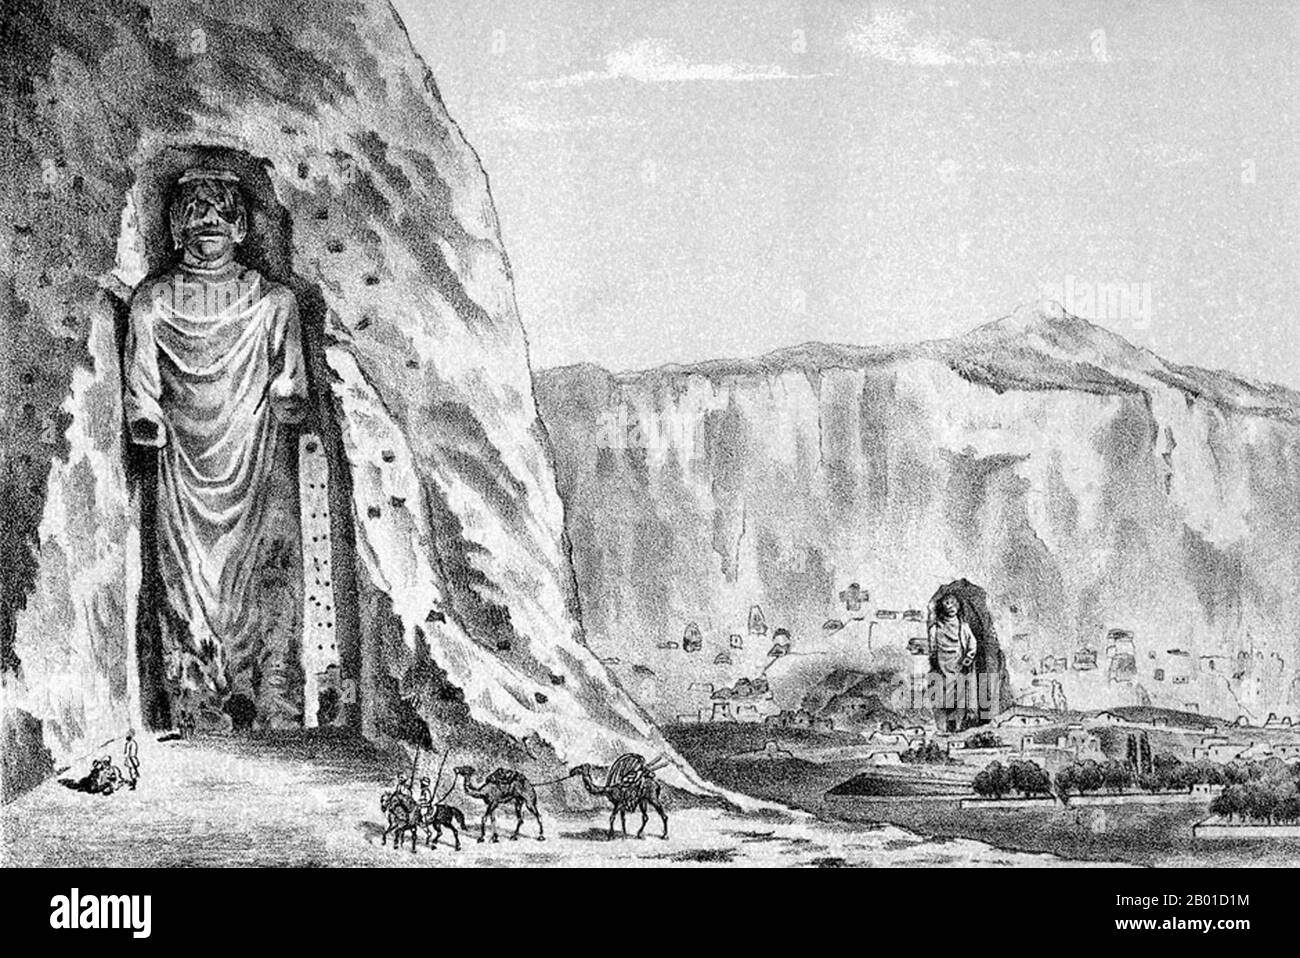 The Buddhas of Bamiyan were two 6th century monumental statues of standing Buddhas carved into the side of a cliff in the Bamiyan valley in the Hazarajat region of central Afghanistan, situated 230 km (143 miles) northwest of Kabul at an altitude of 2,500 meters (8,202 ft).  Built in 507 CE, the larger in 554 CE, the statues represented the classic blended style of Gandhara art. The main bodies were hewn directly from the sandstone cliffs, but details were modeled in mud mixed with straw, coated with stucco. This coating, practically all of which was worn away long ago, was painted to enhance Stock Photo